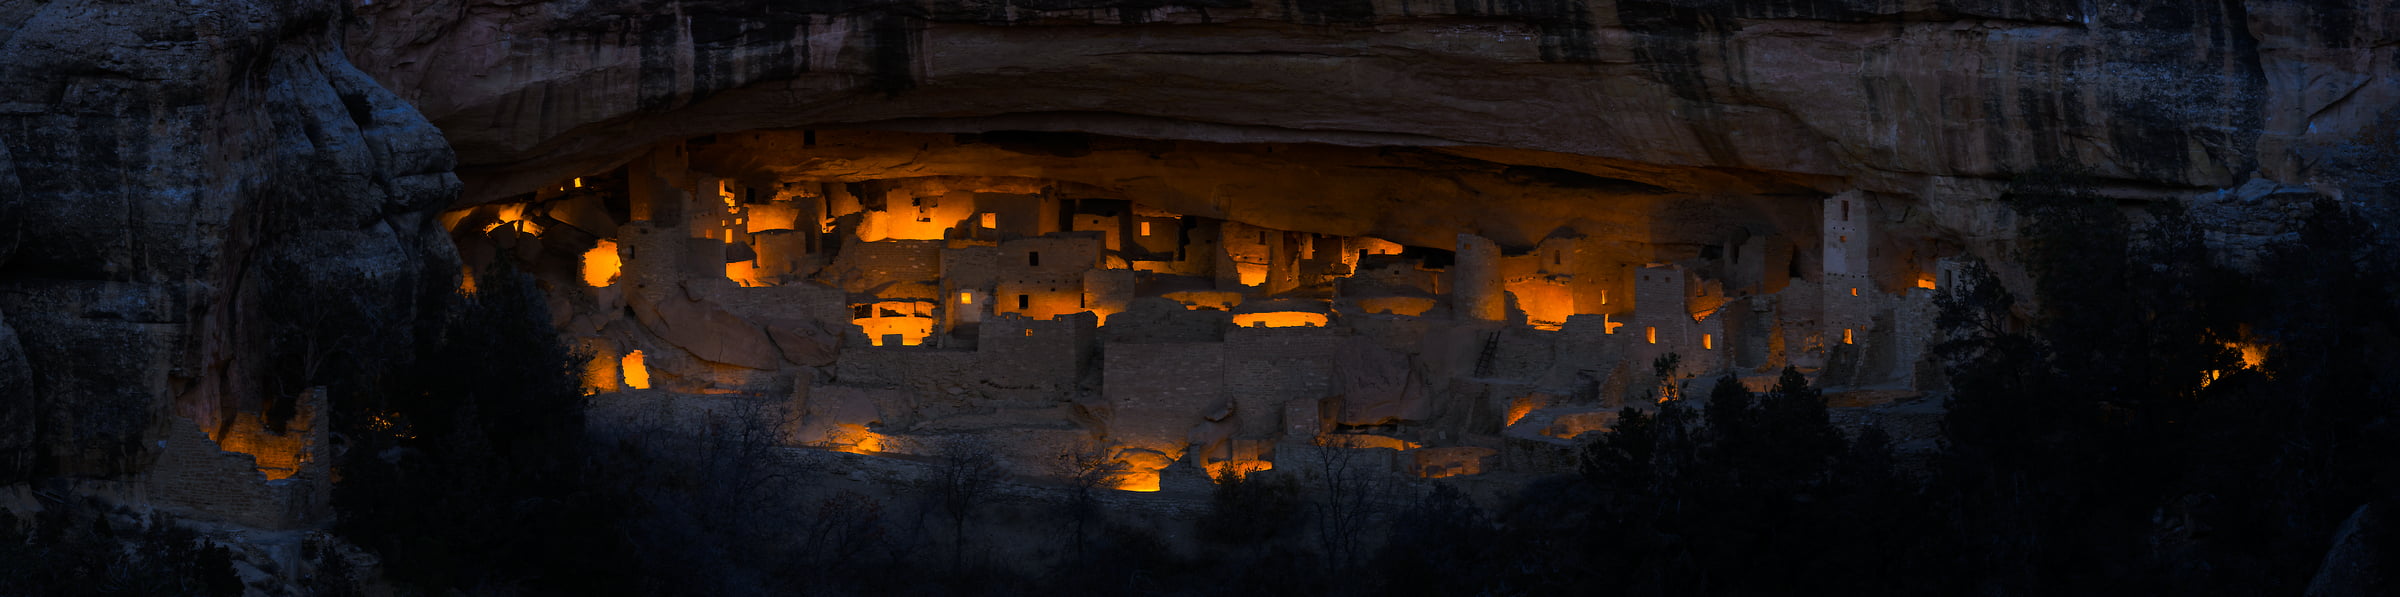 188 megapixels! A very high resolution, large-format VAST photo print of Mesa Verde National Park at night; fine art photograph created by Phillip Noll.